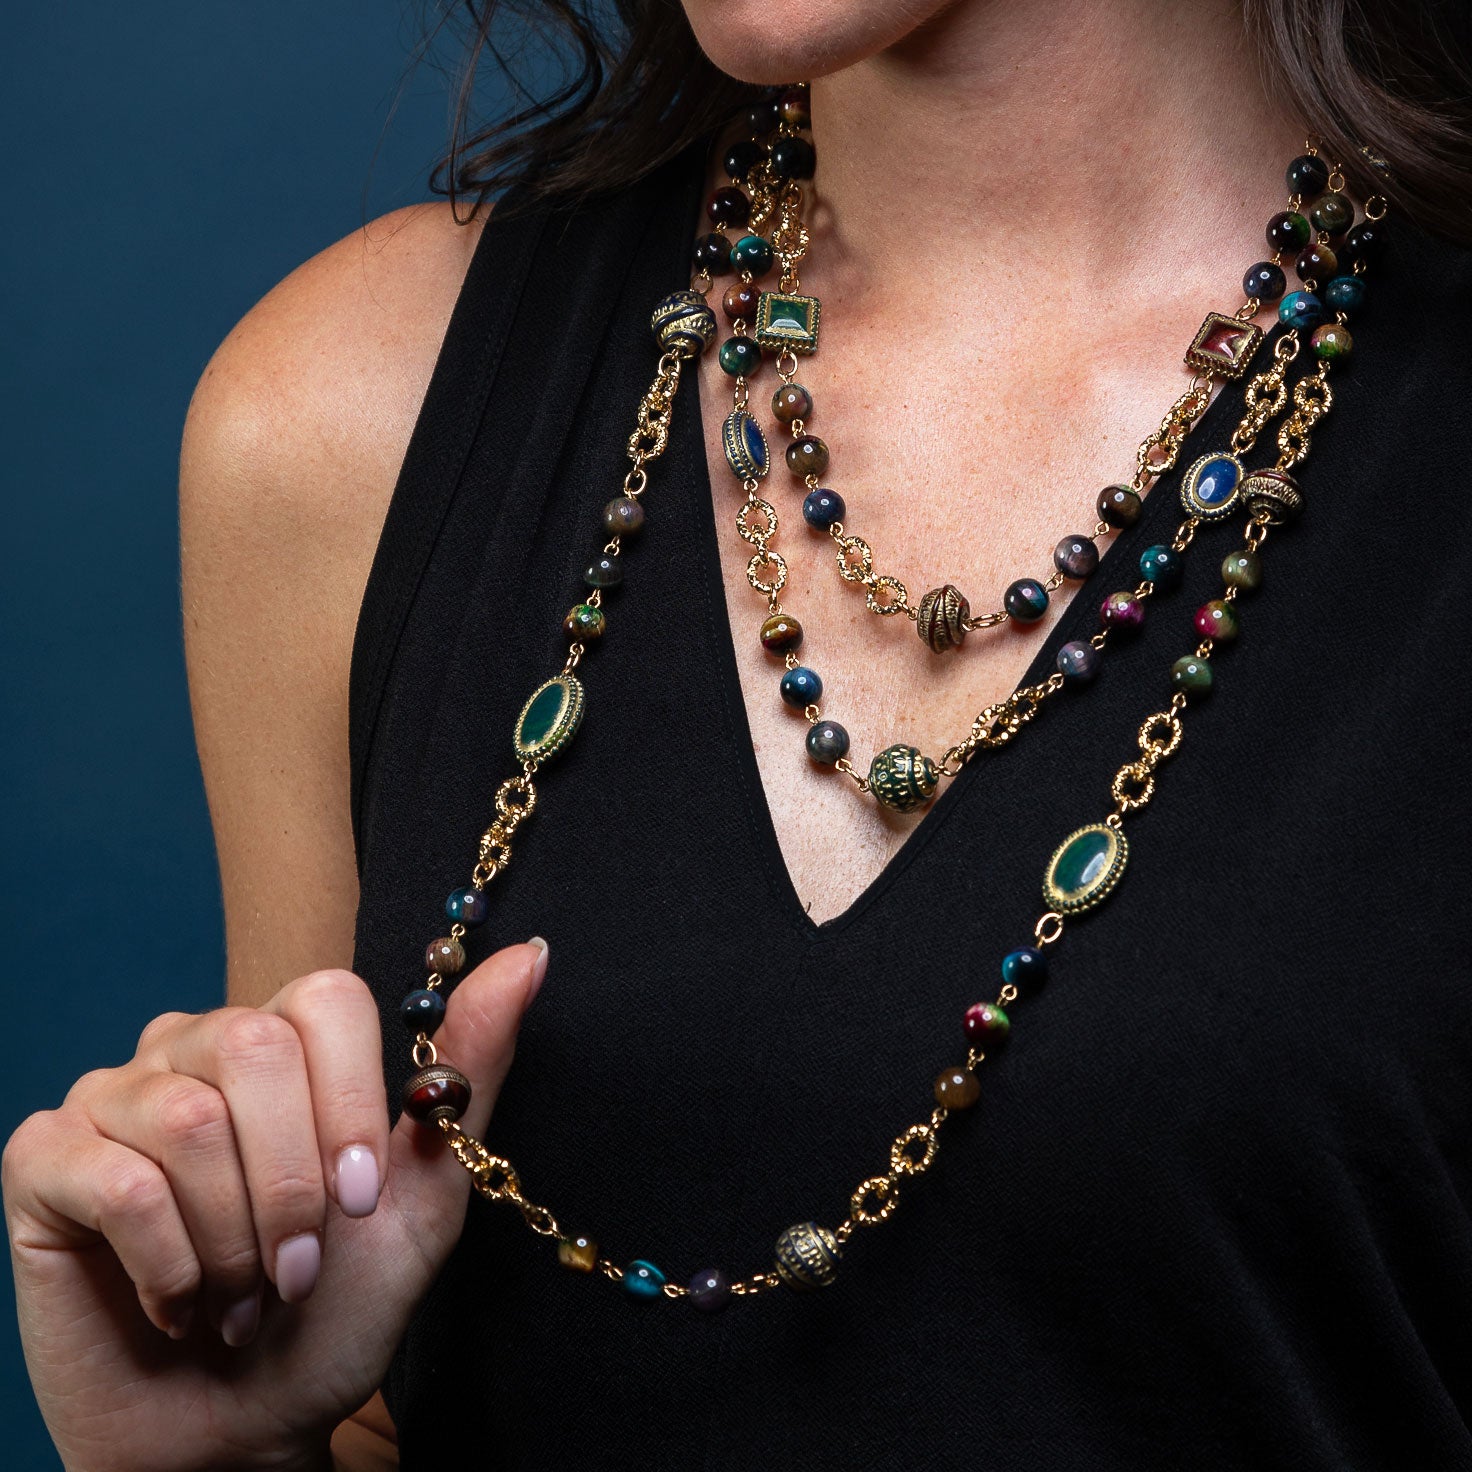 Long necklace of semi-precious stones and chain